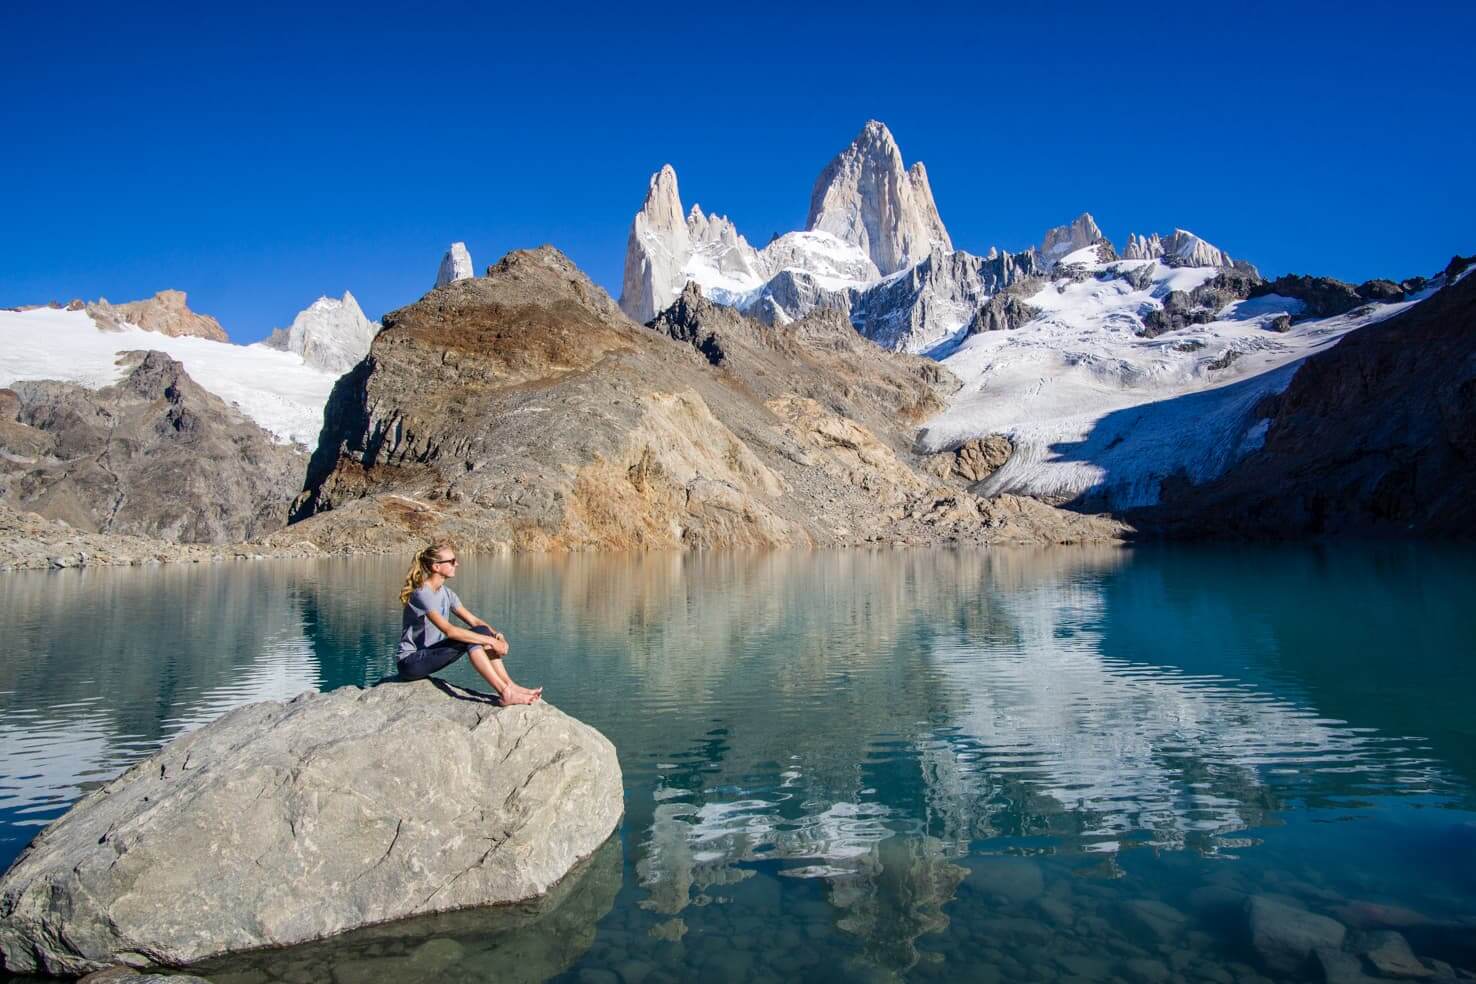 19 smart tips for planning your next trip - Fitz Roy, Argentina